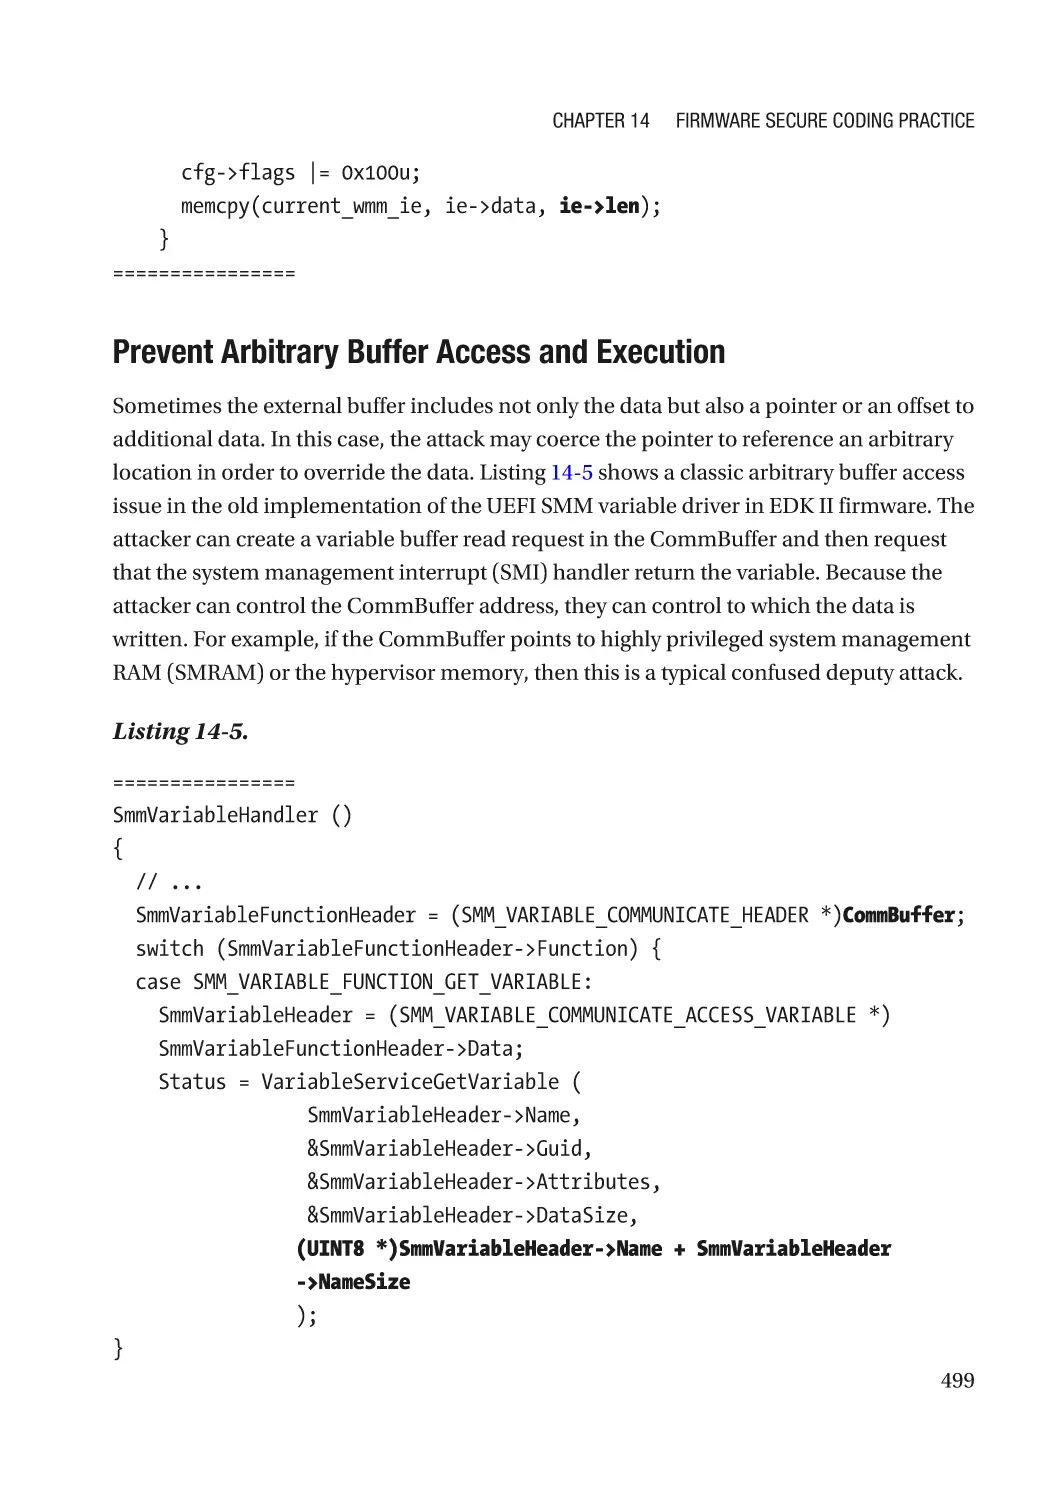 Prevent Arbitrary Buffer Access and Execution